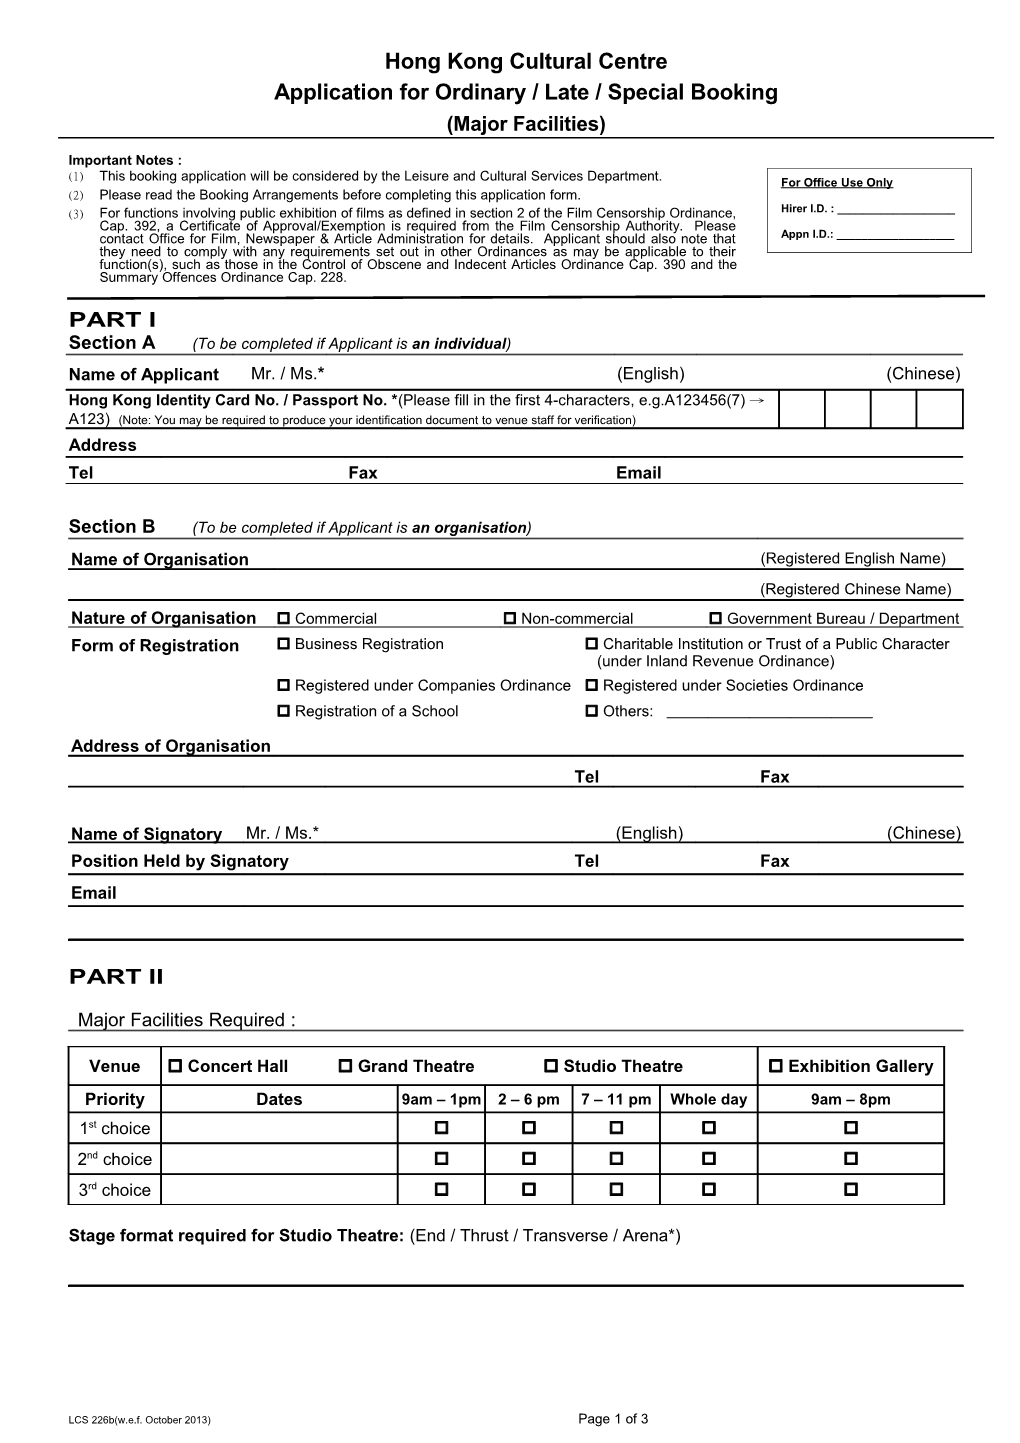 Hong Kong Cultural Centre Application Form for Ordinary / Late / Special Booking (Major